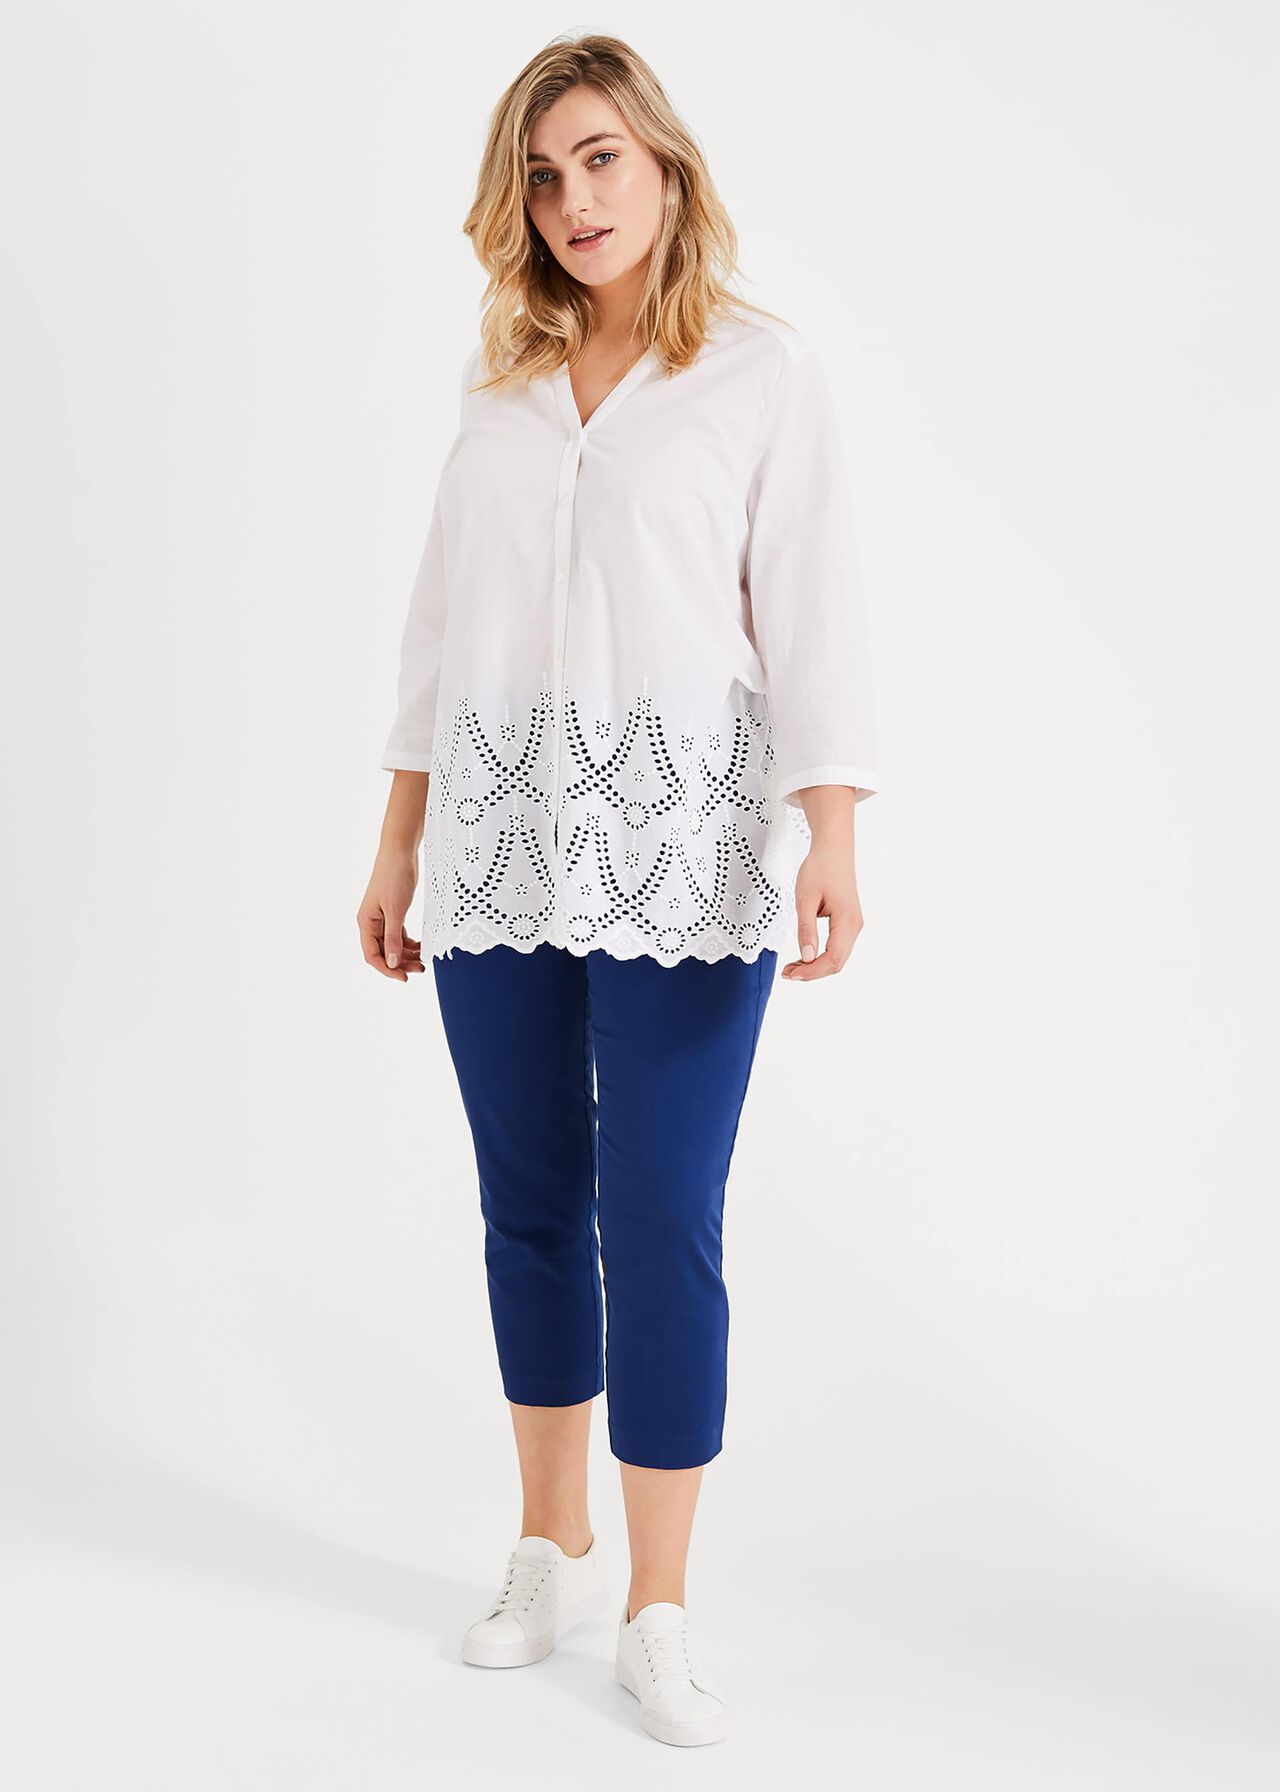 Maeve Broderie Top